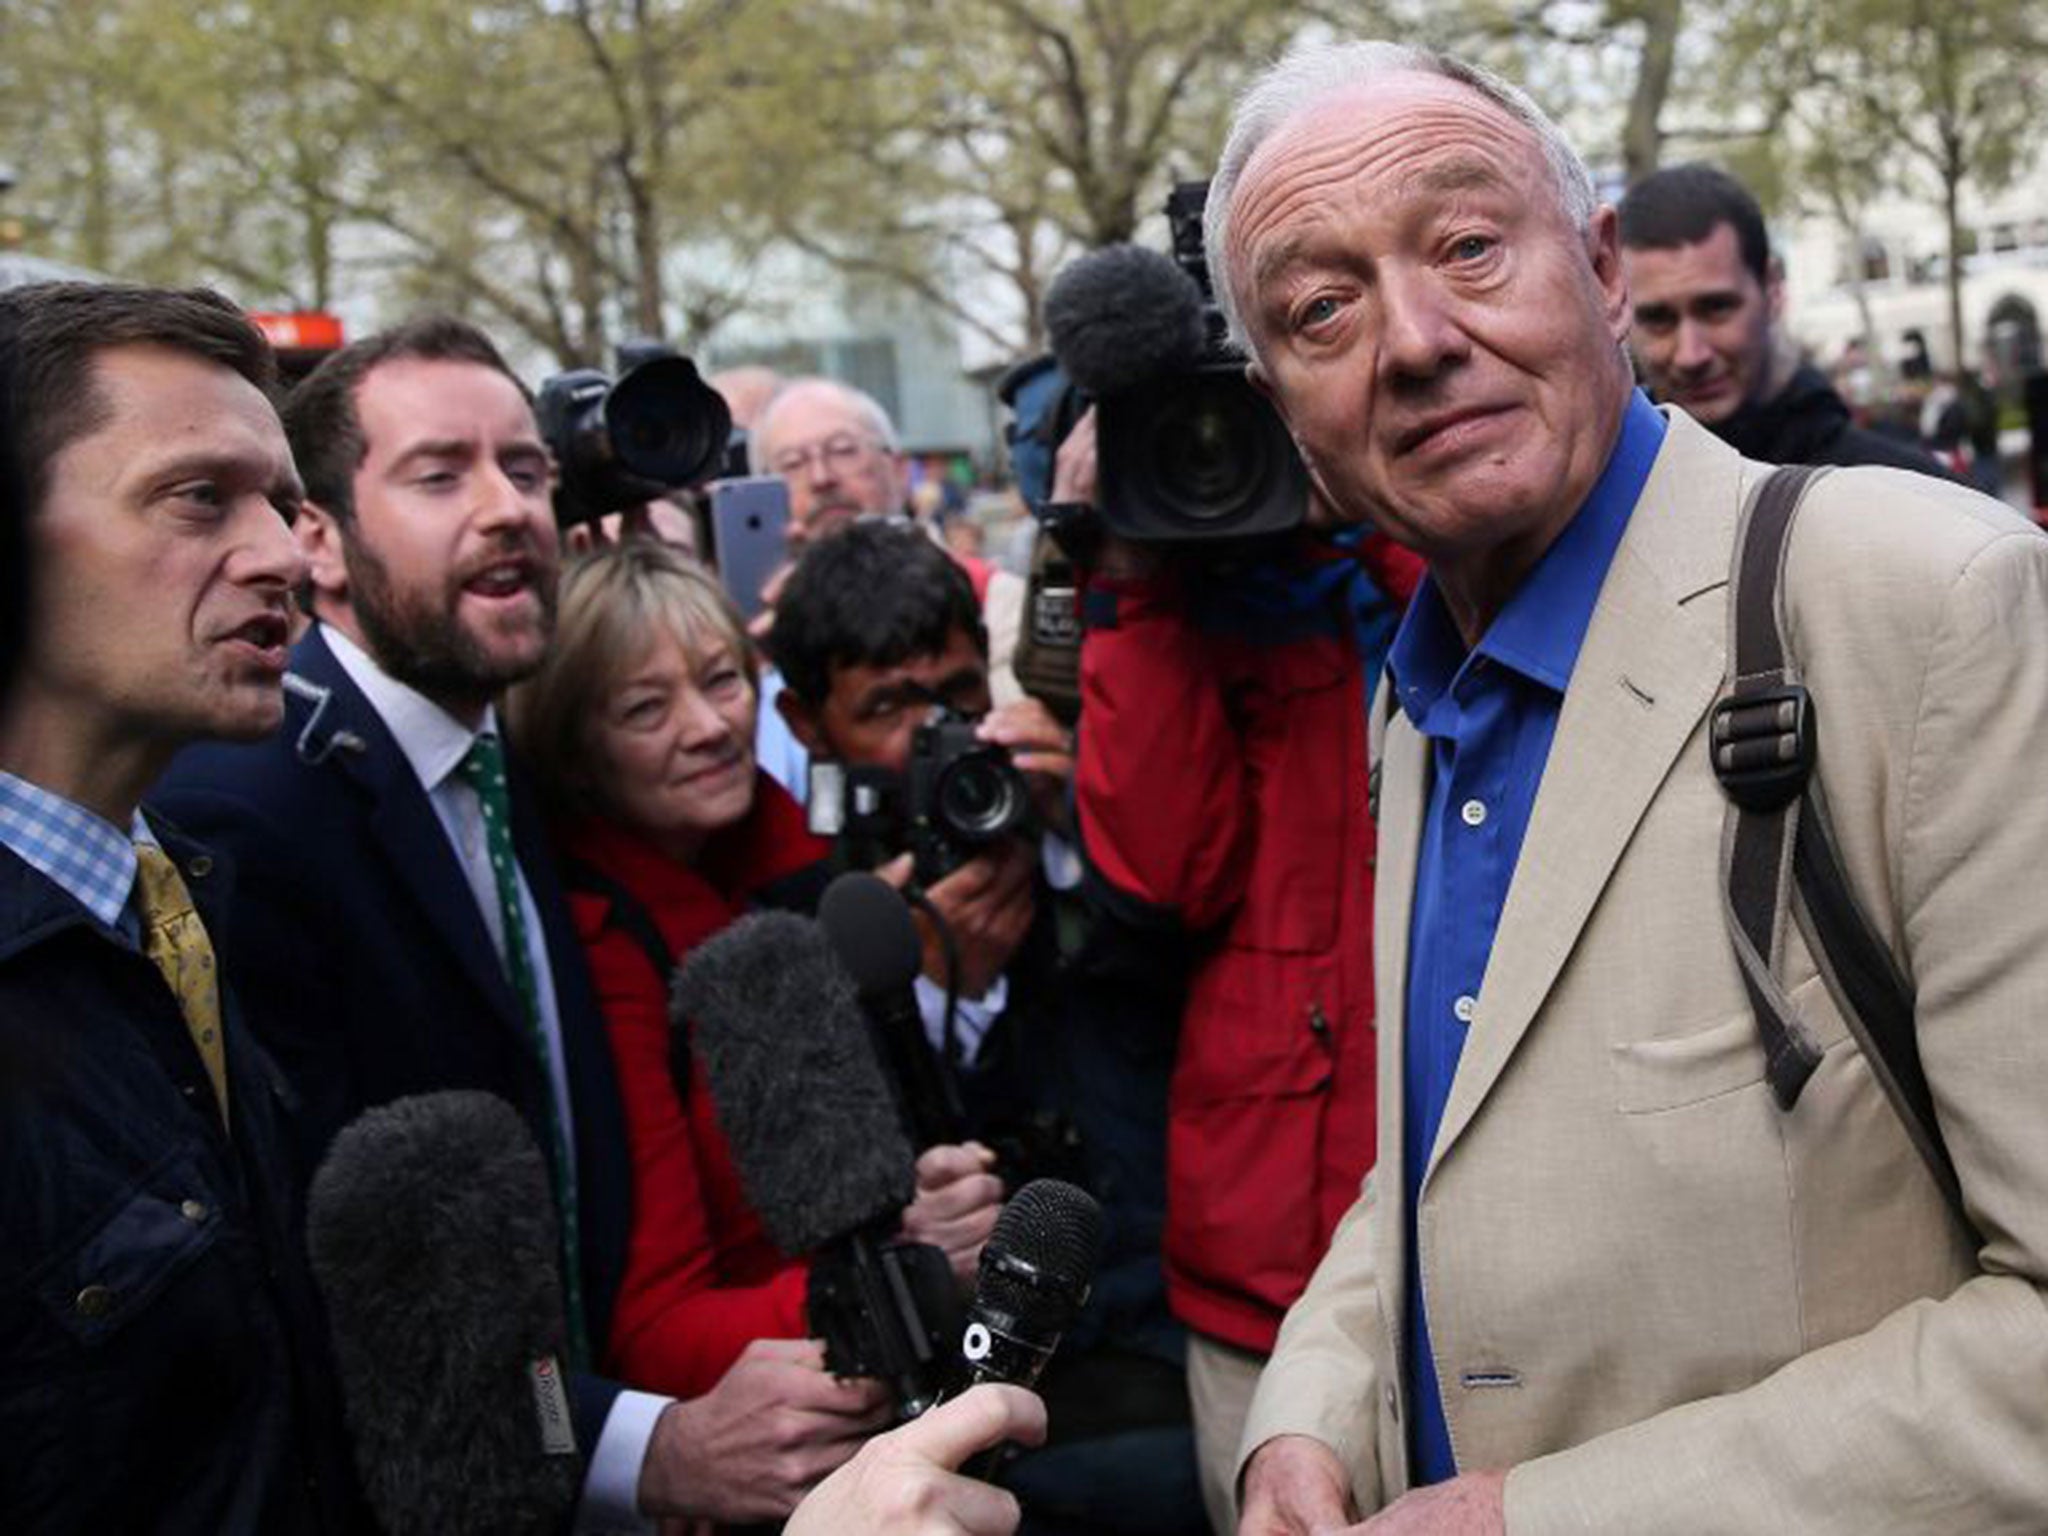 Former Mayor of London, Ken Livingstone, who was suspended by the Labour Party last week